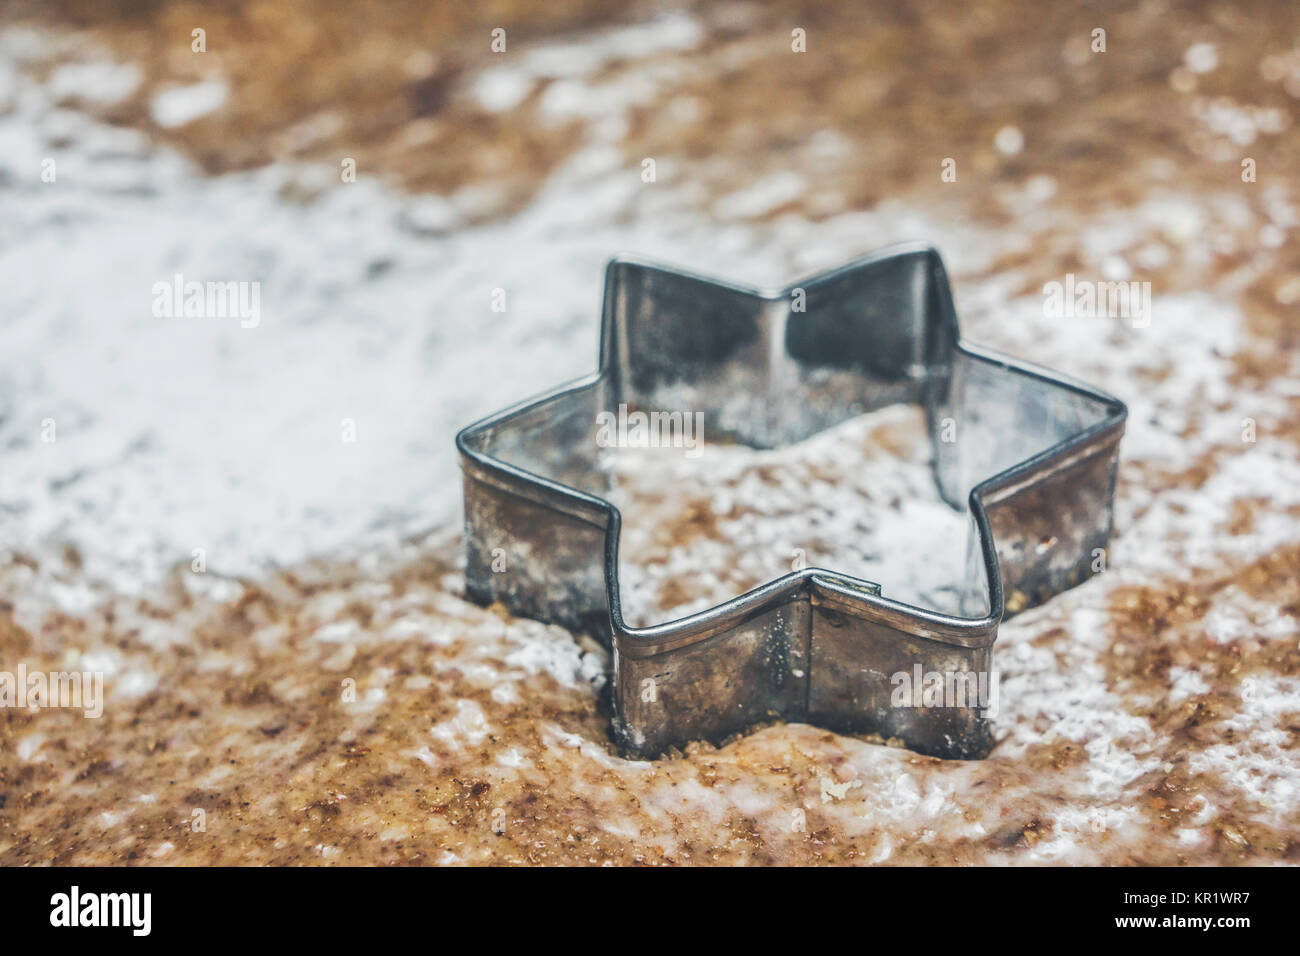 A star shaped pastry cutter on a pastry ready to make traditional christmas cookies. Stock Photo